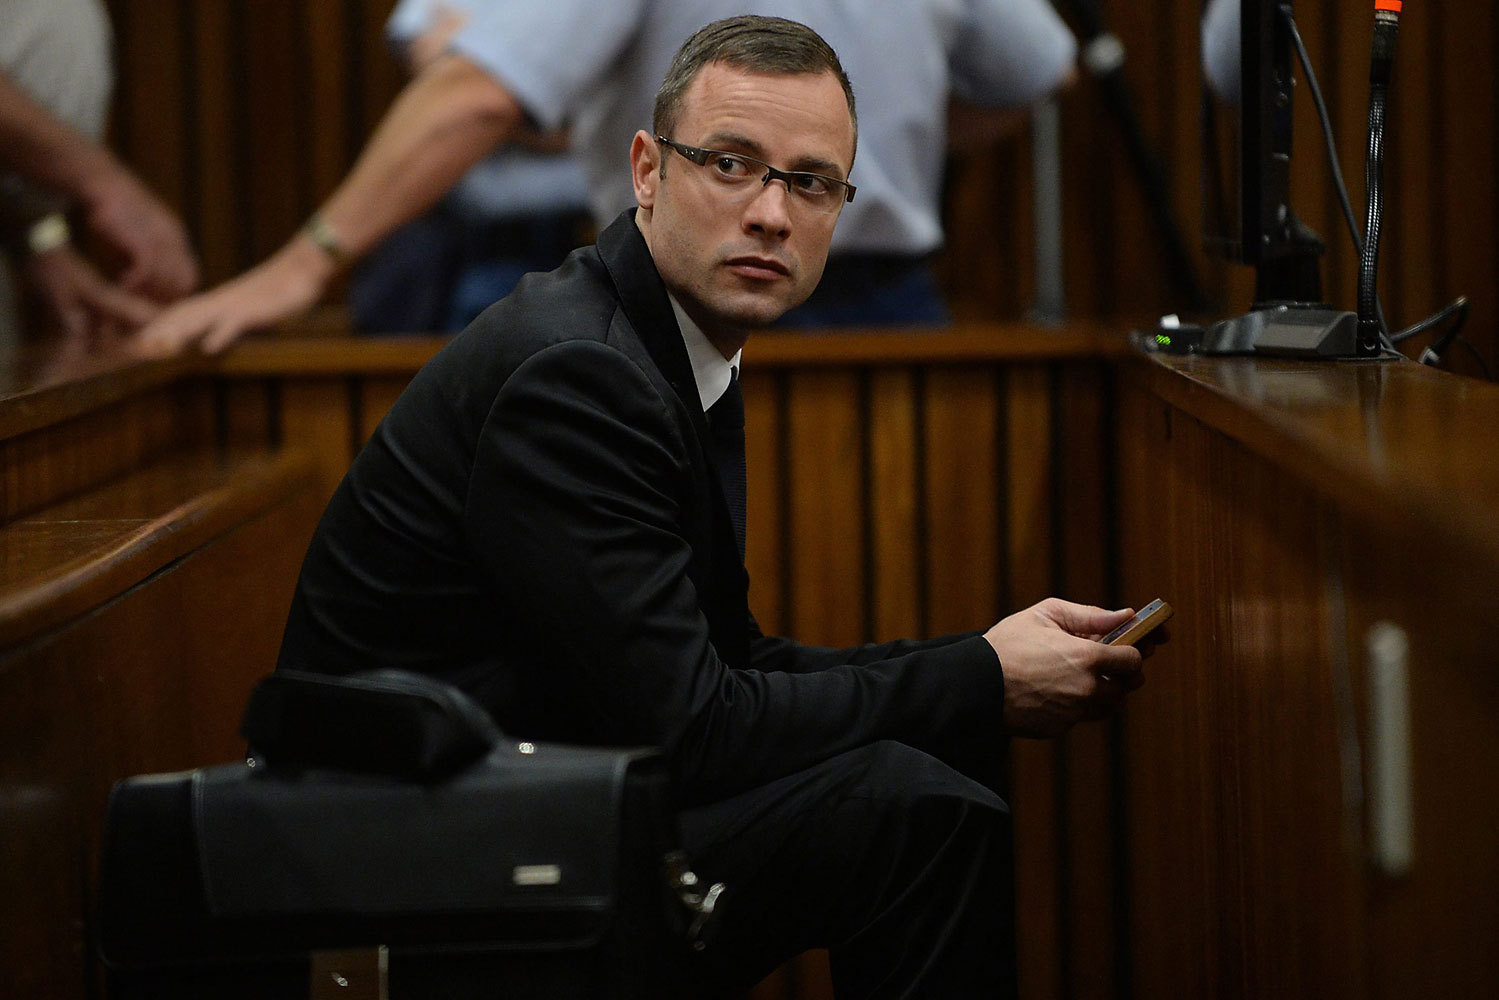 South African Paralympic athlete Oscar Pistorius is seen during his ongoing murder trial at the high court in Pretoria, South Africa, March 14, 2014. 